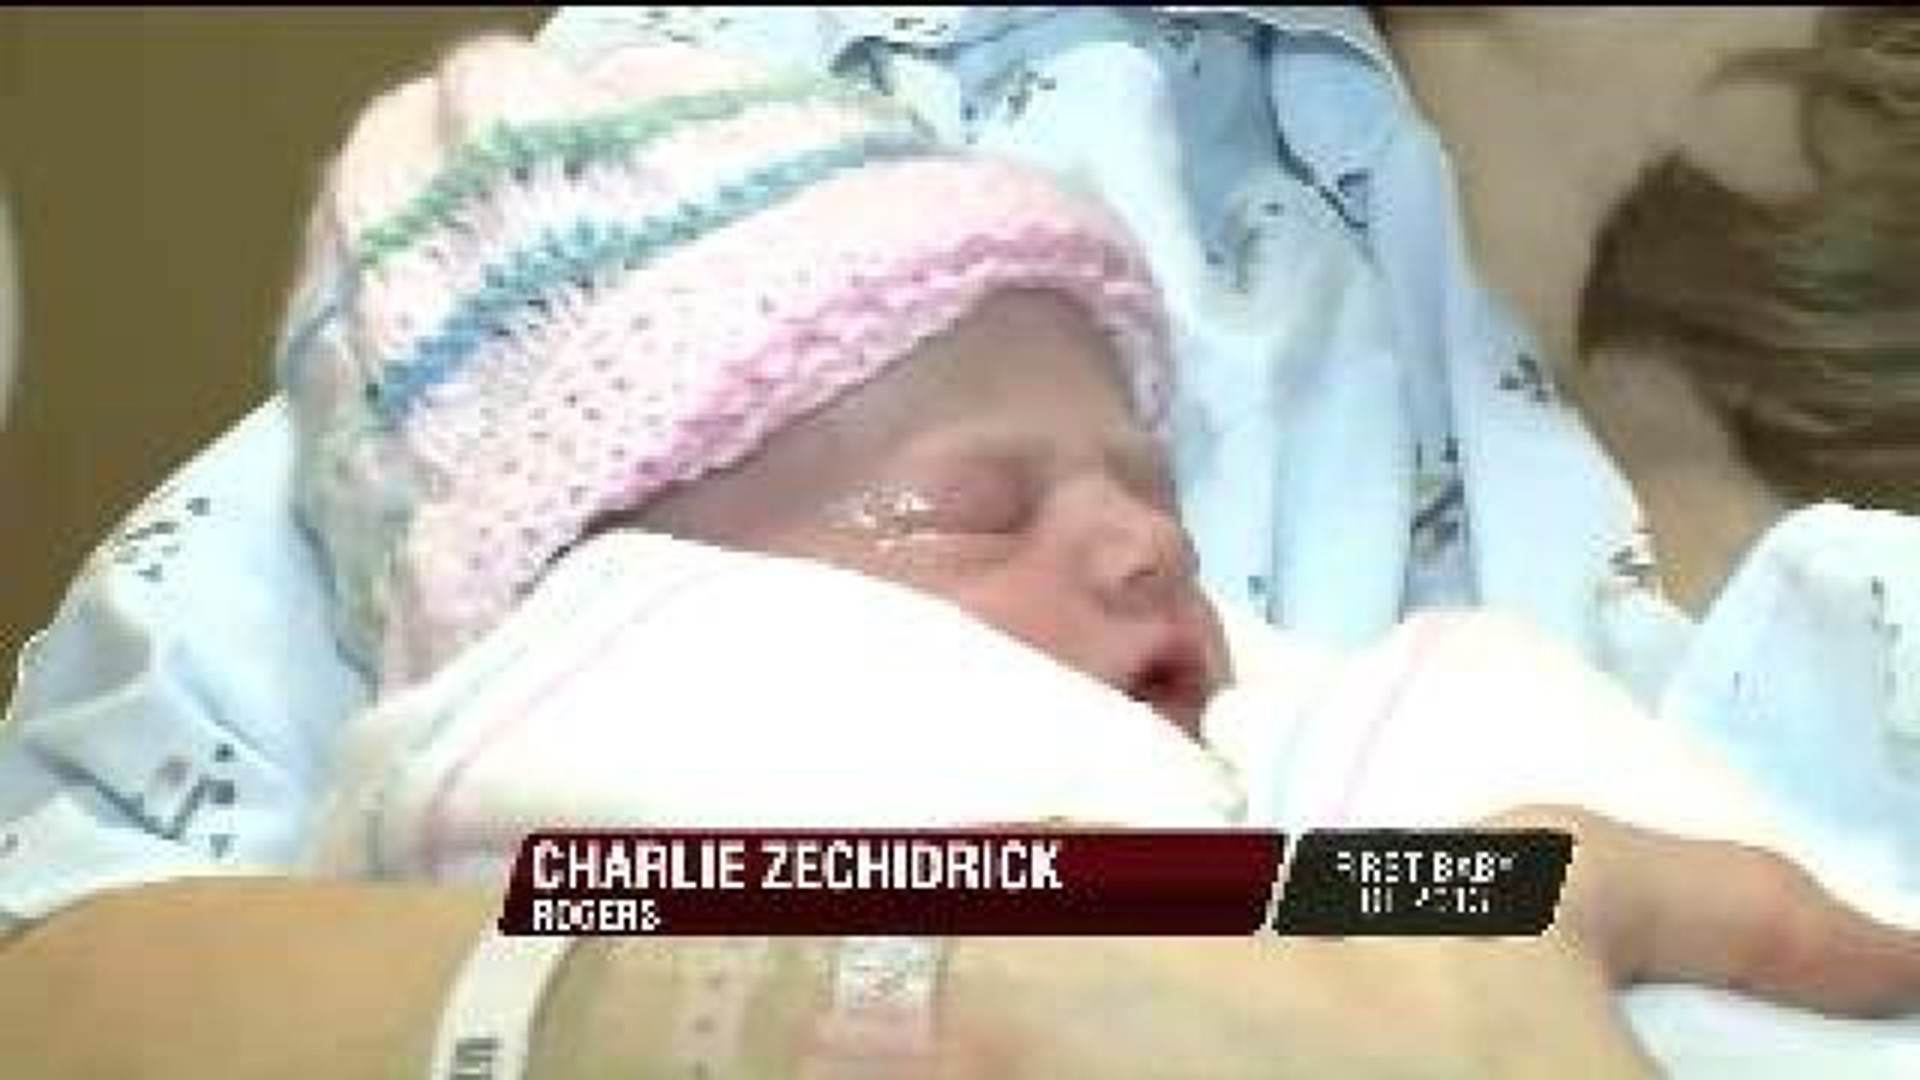 Rogers Parents Welcome New Year Baby